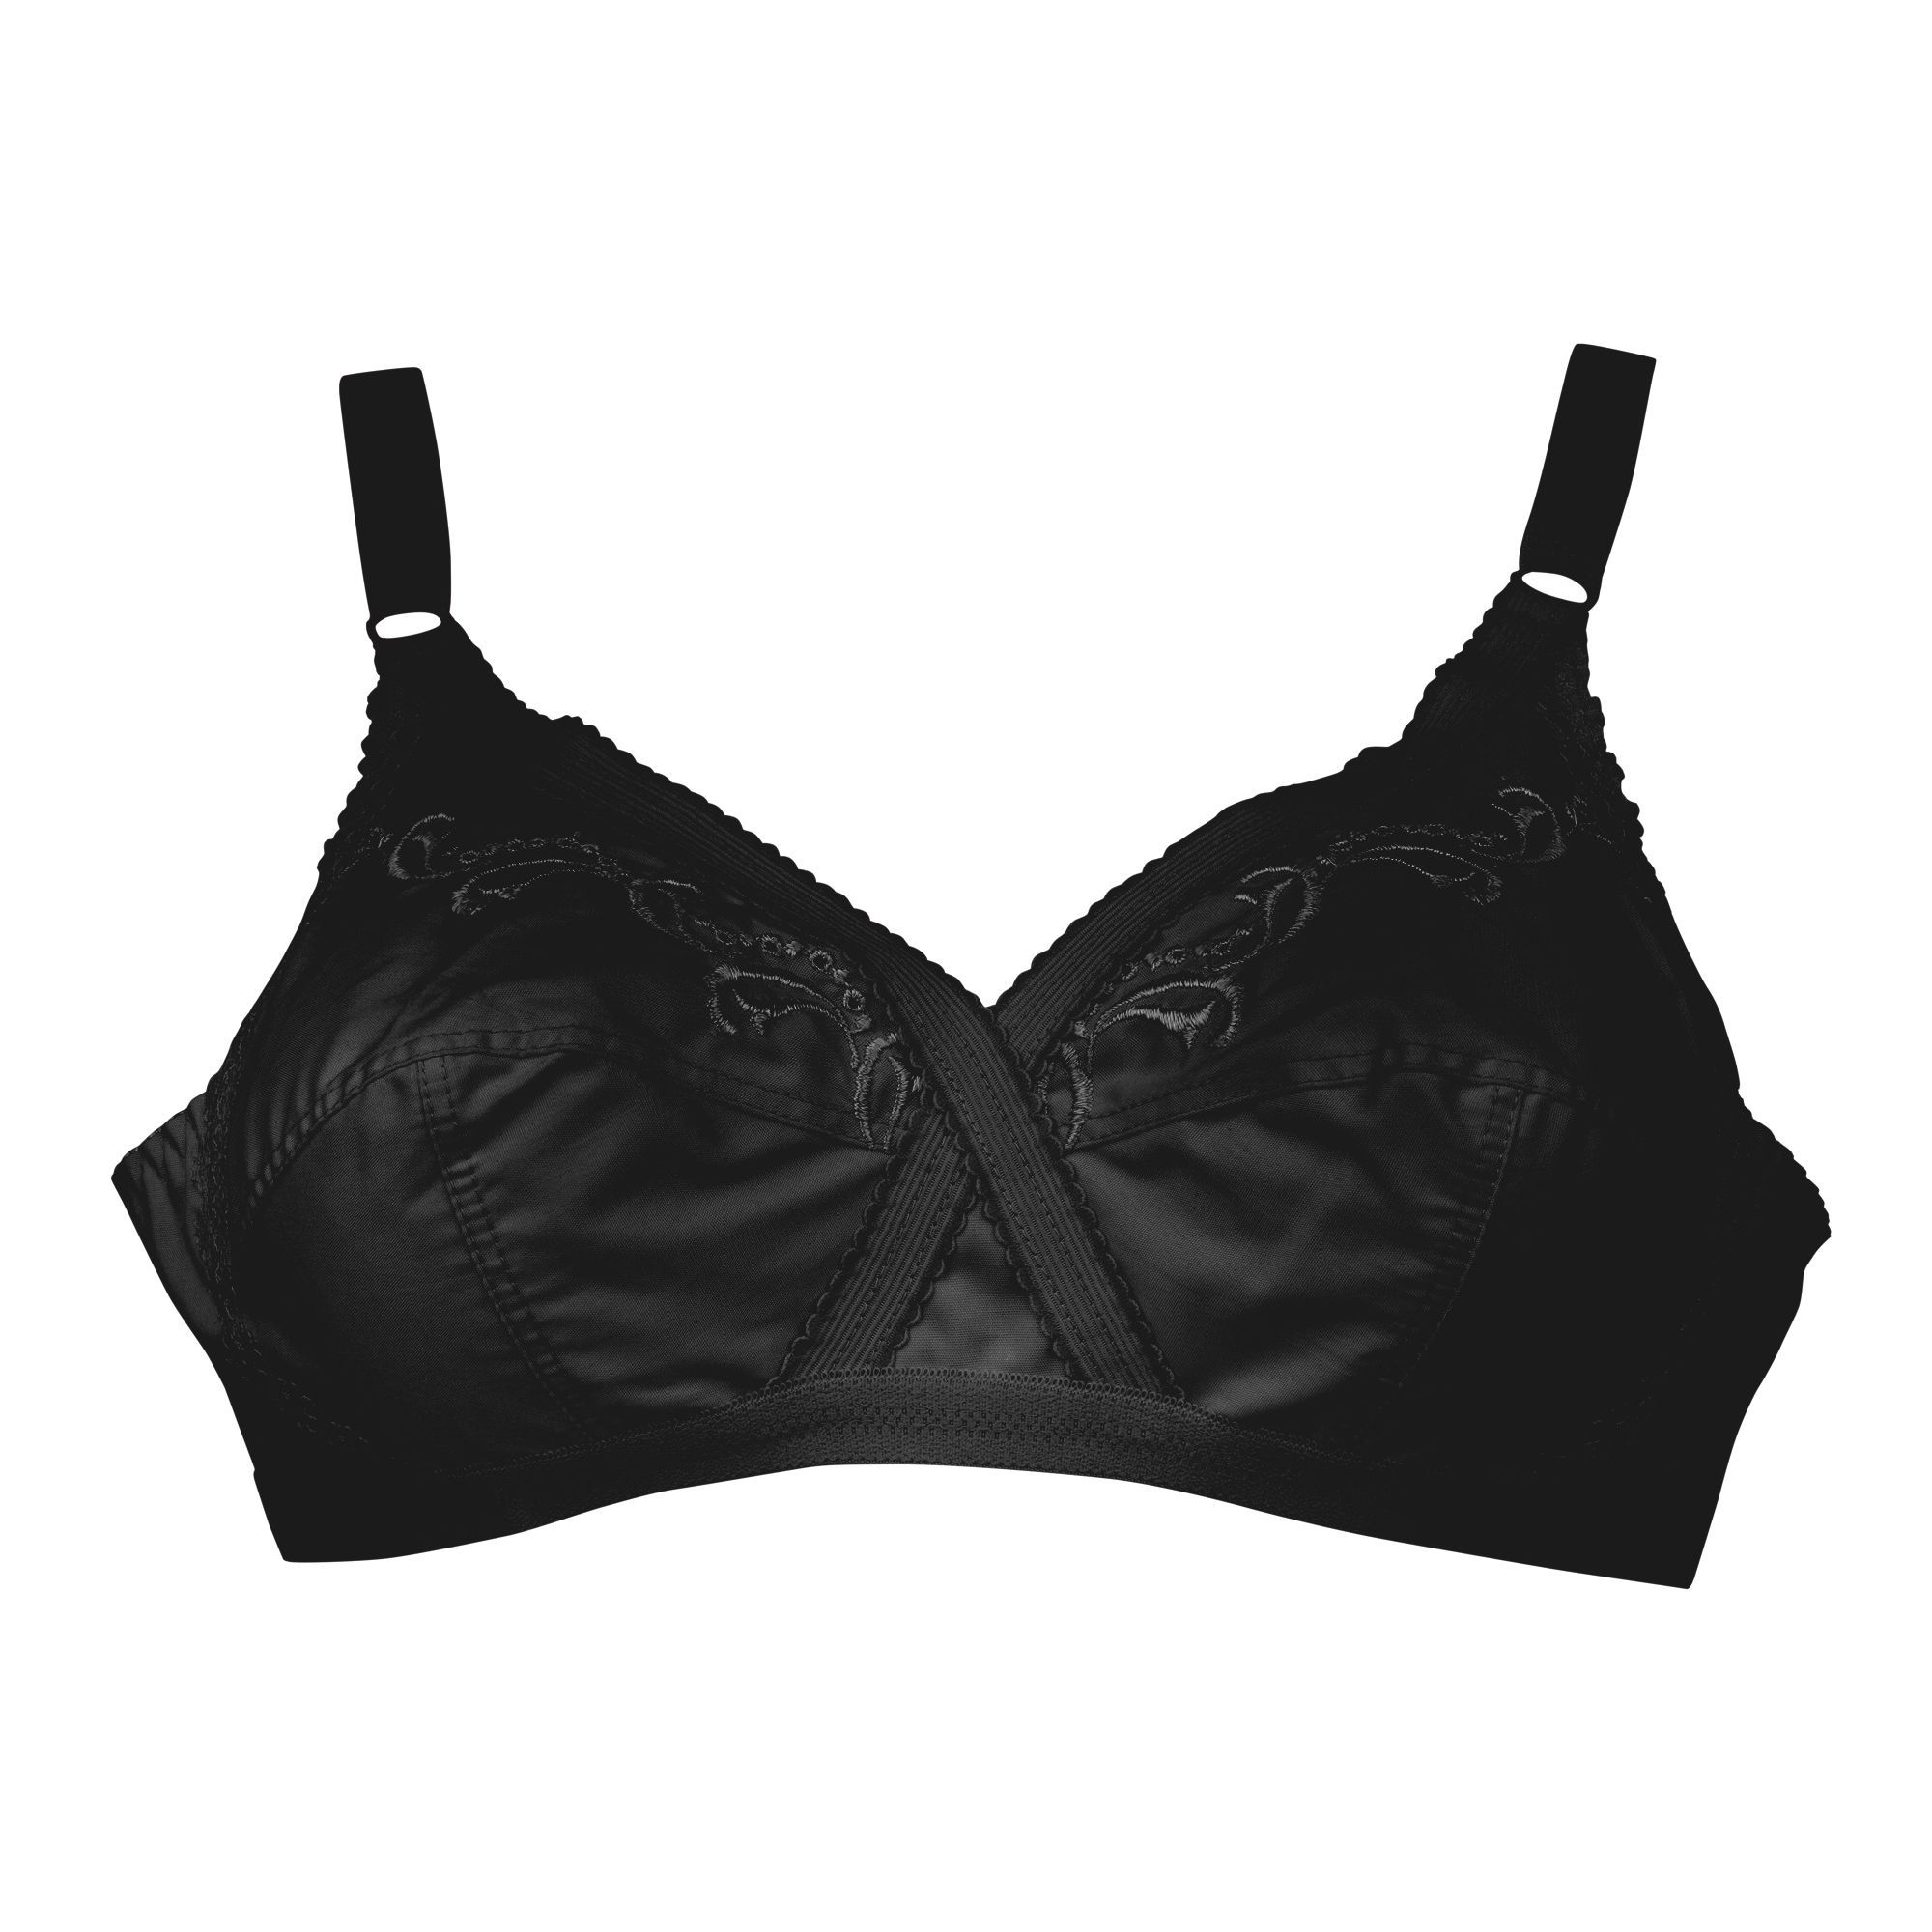 Purchase IFG X-Over Cotton Bra, Black Online at Best Price in